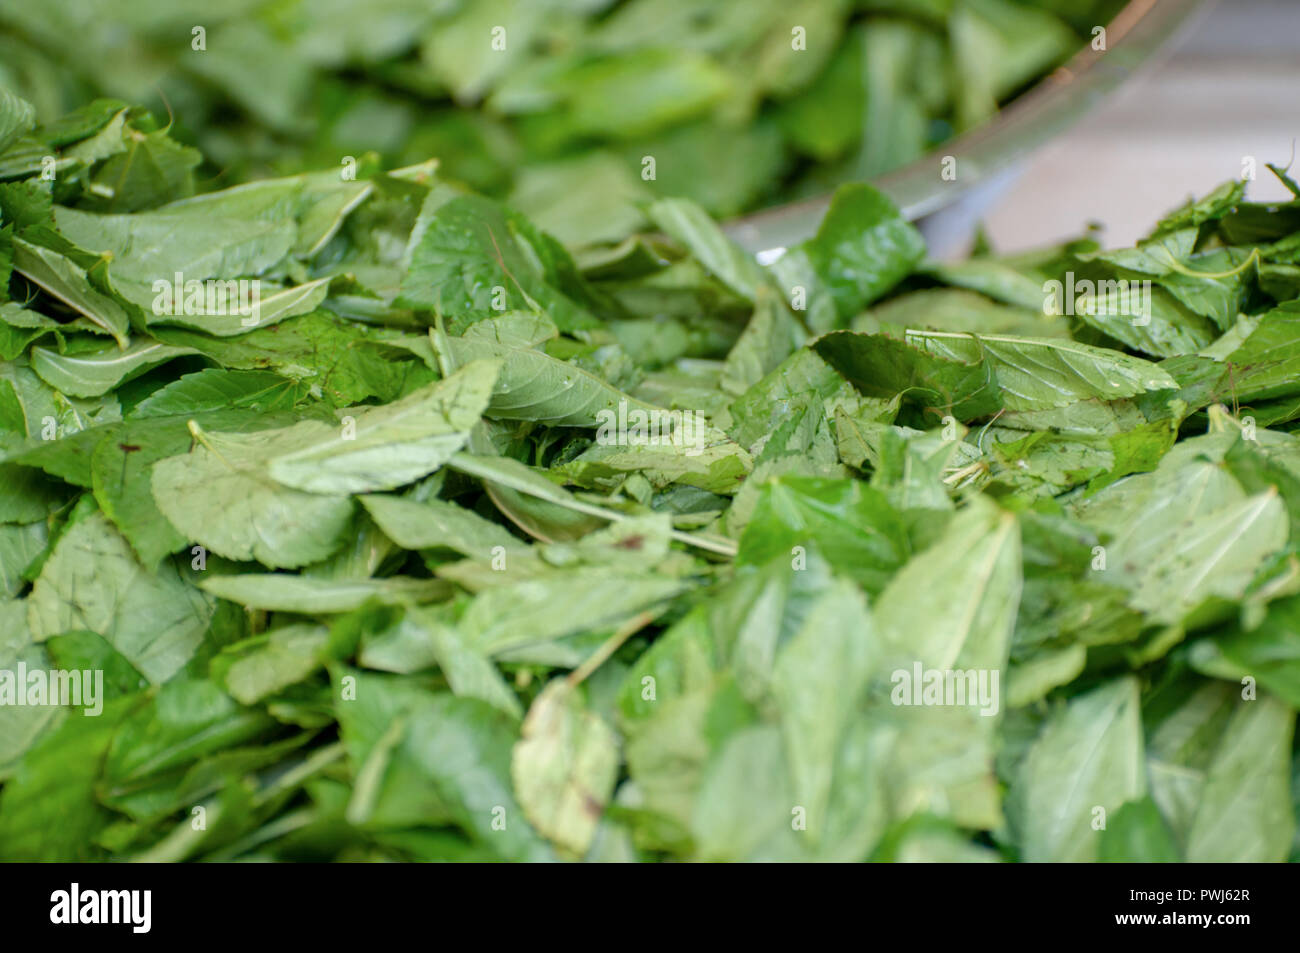 Mulukhiyah Leafs drying in the sun. Mulukhiyah are the leaves of Corchorus olitorius commonly known as The Arab 's mallow, Nalta jute, or tossa jute.I Stock Photo